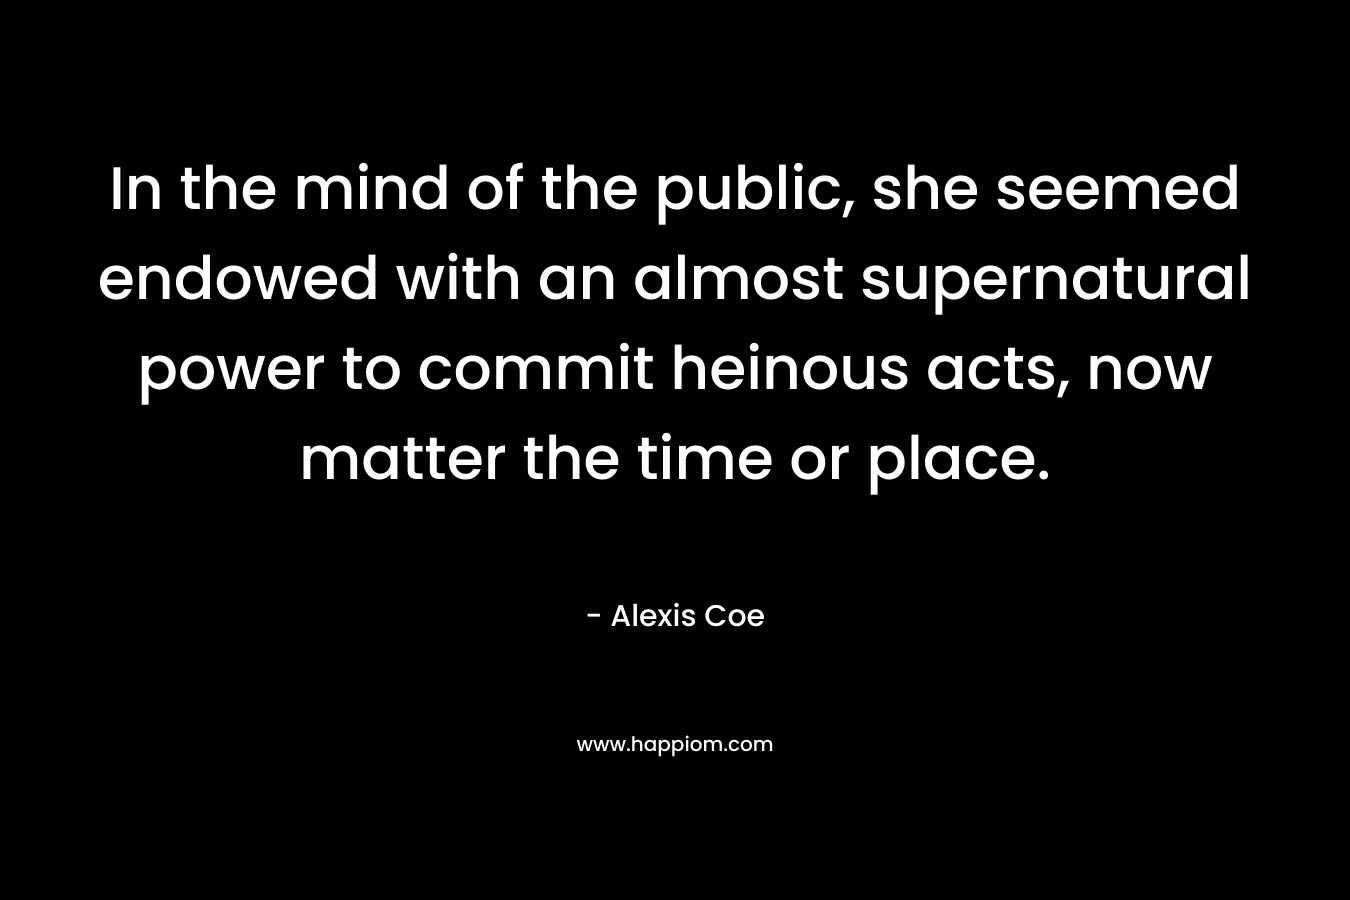 In the mind of the public, she seemed endowed with an almost supernatural power to commit heinous acts, now matter the time or place. – Alexis Coe